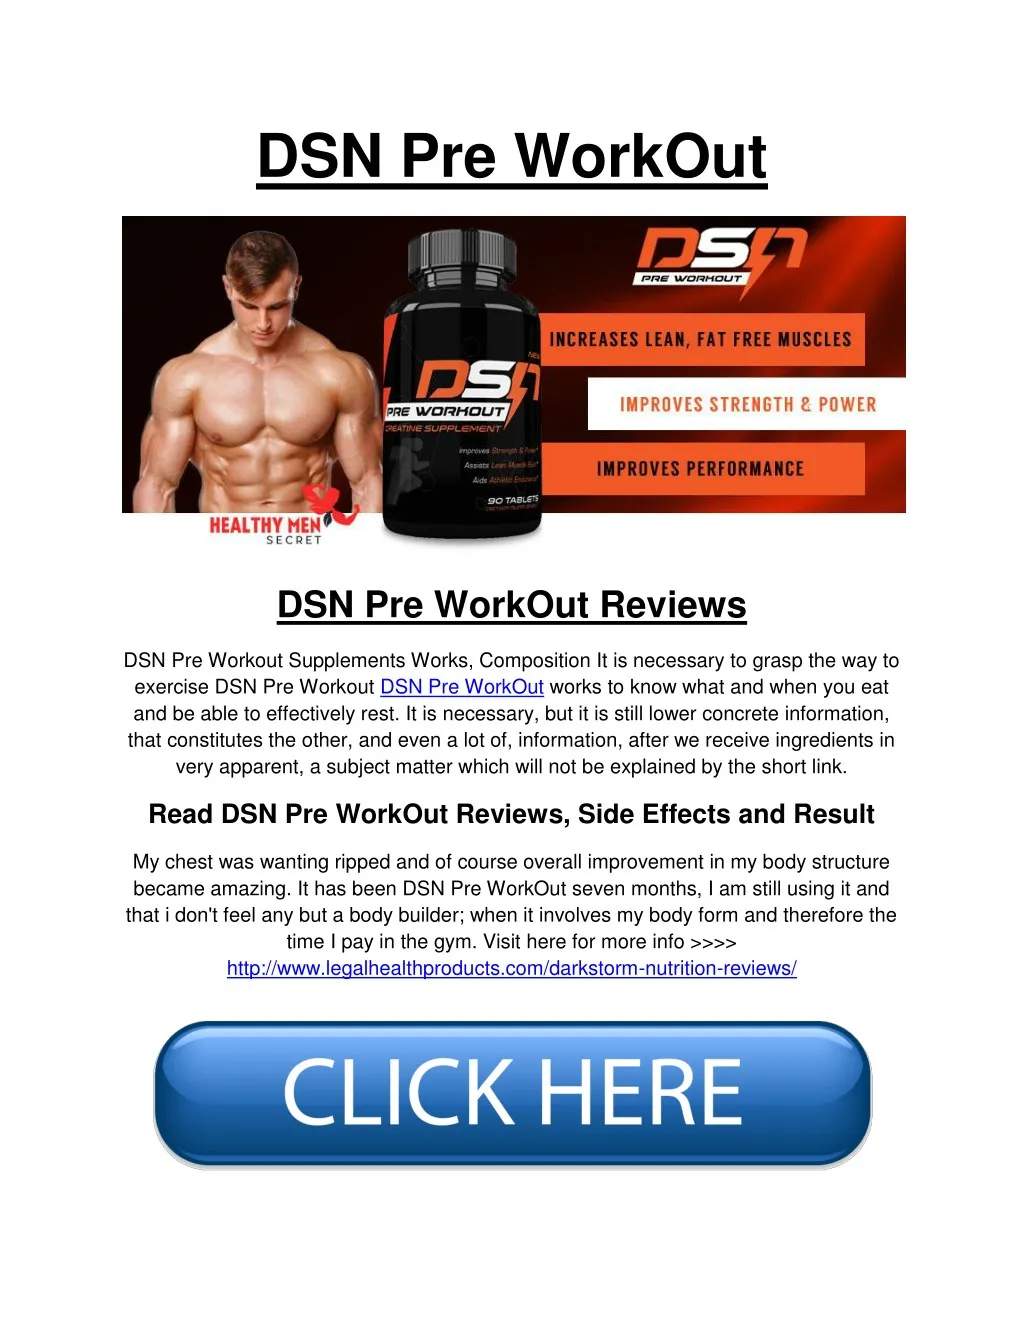 dsn pre workout